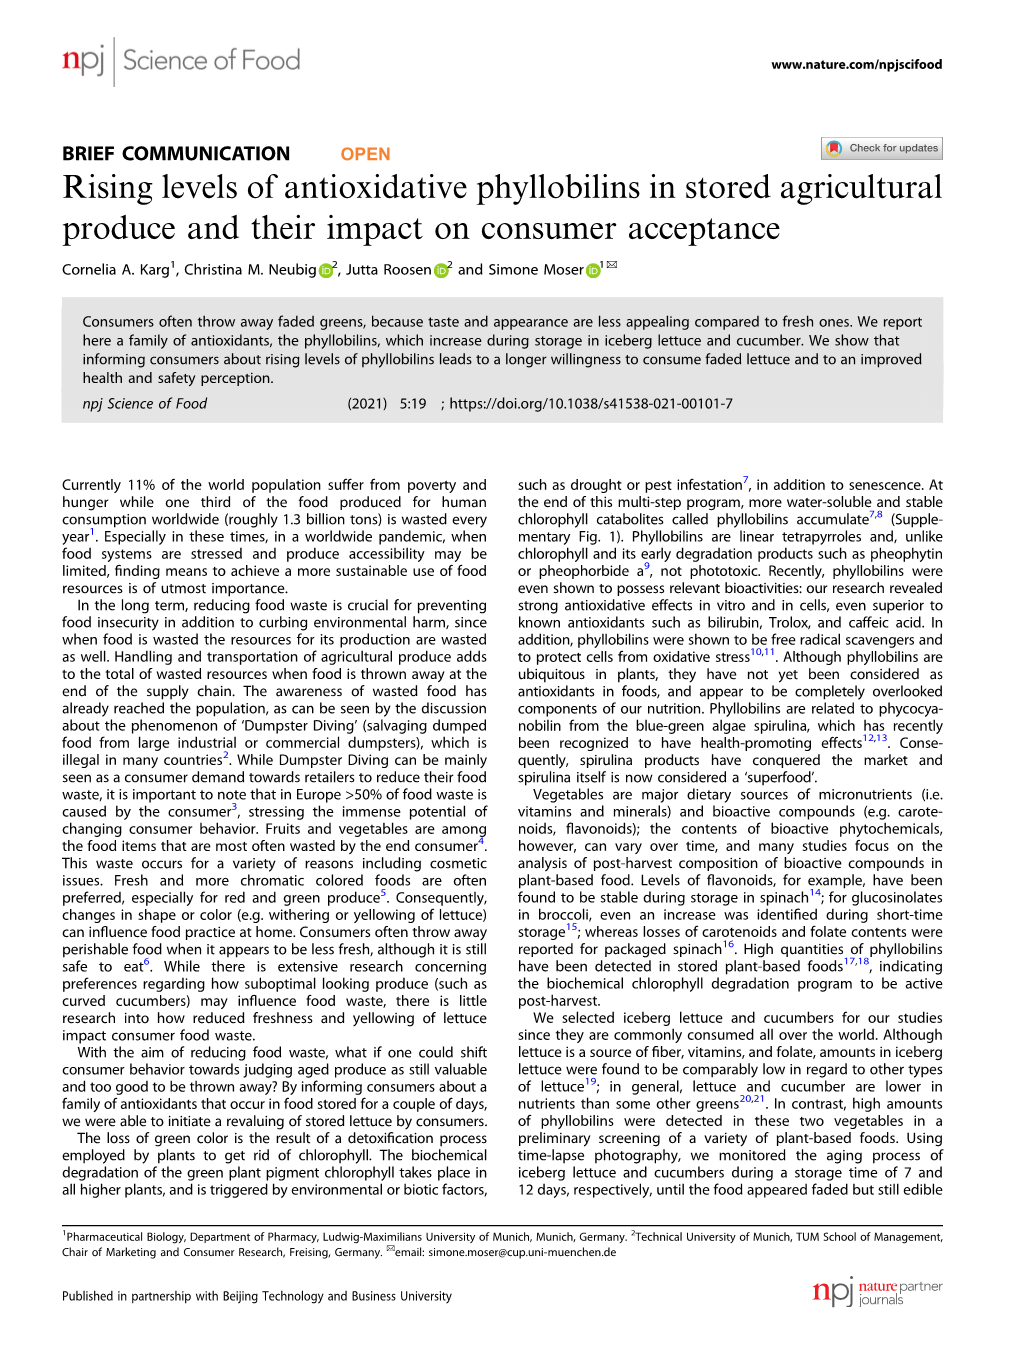 Rising Levels of Antioxidative Phyllobilins in Stored Agricultural Produce and Their Impact on Consumer Acceptance ✉ Cornelia A